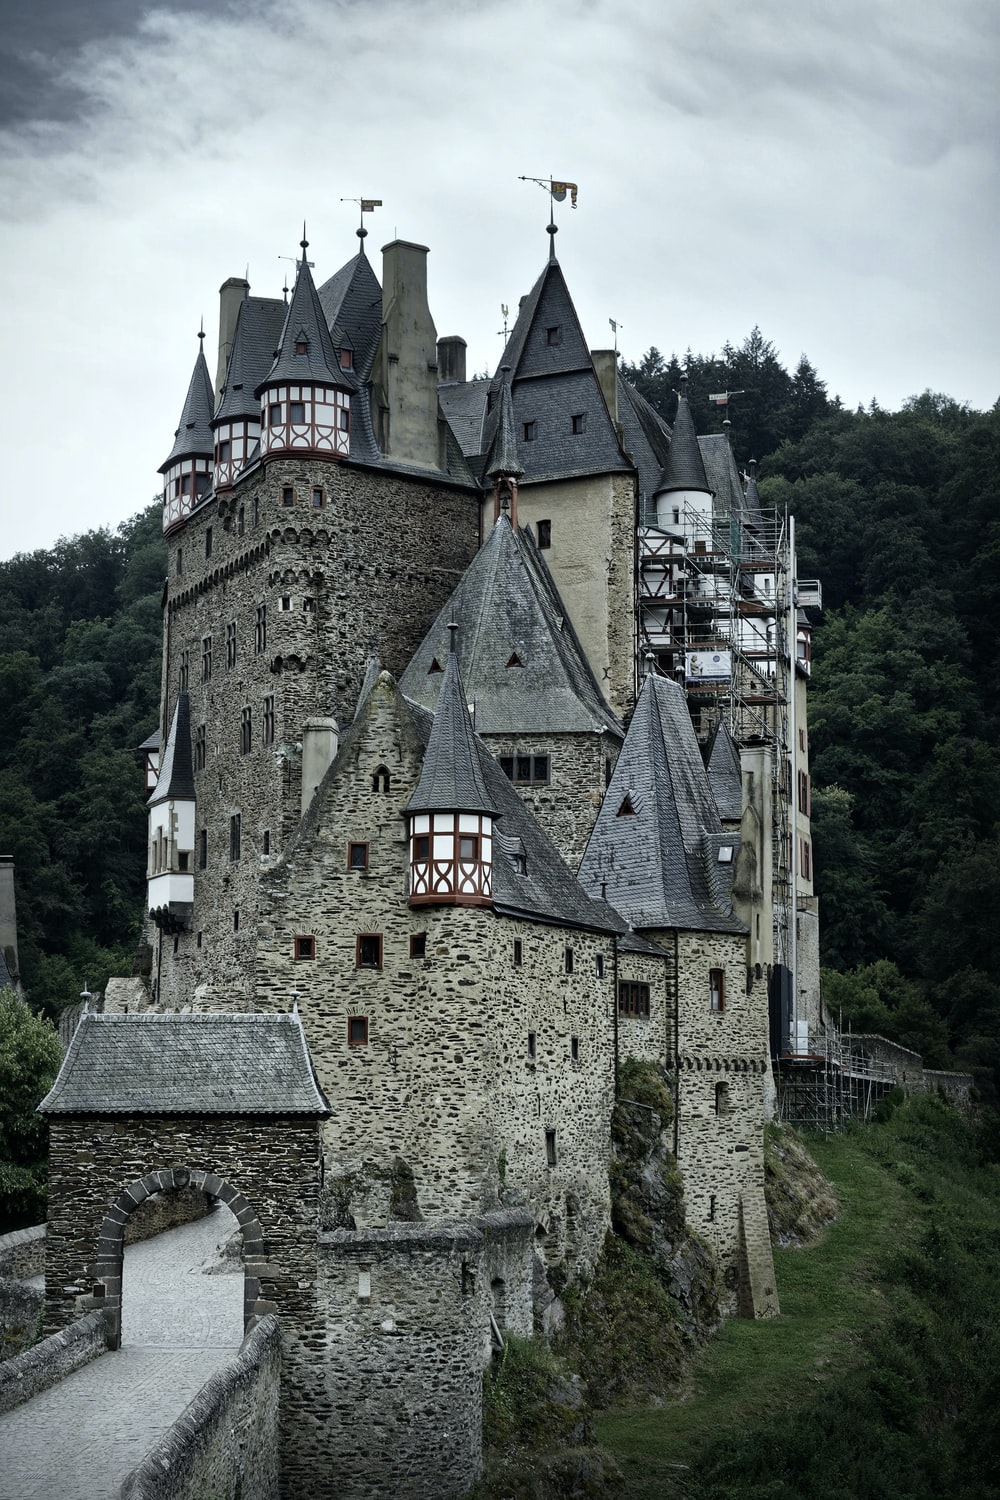 Dracula Castle Picture. Download Free Image